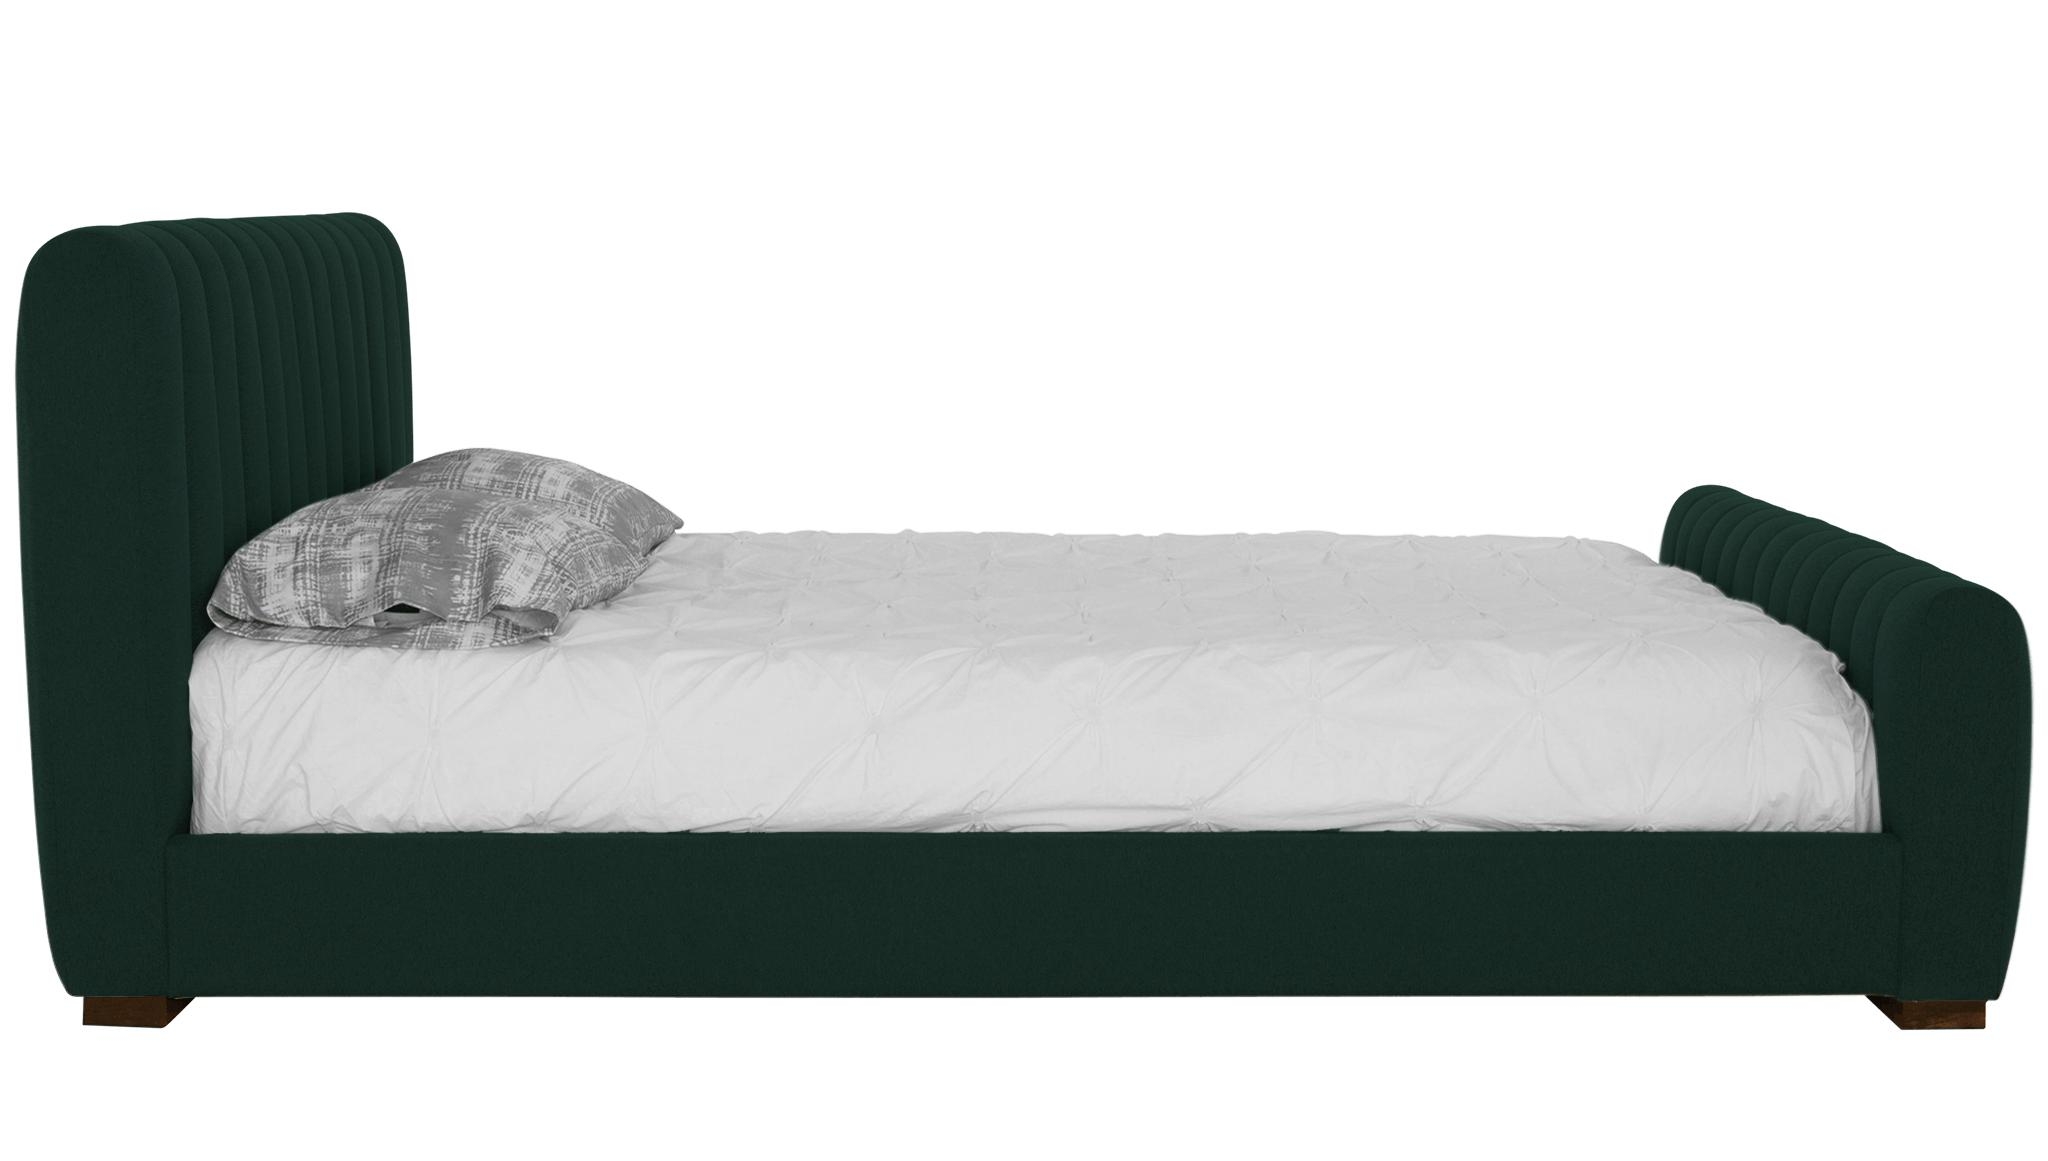 Green Camille Mid Century Modern Bed - Royale Evergreen - Mocha - Eastern King - Image 2